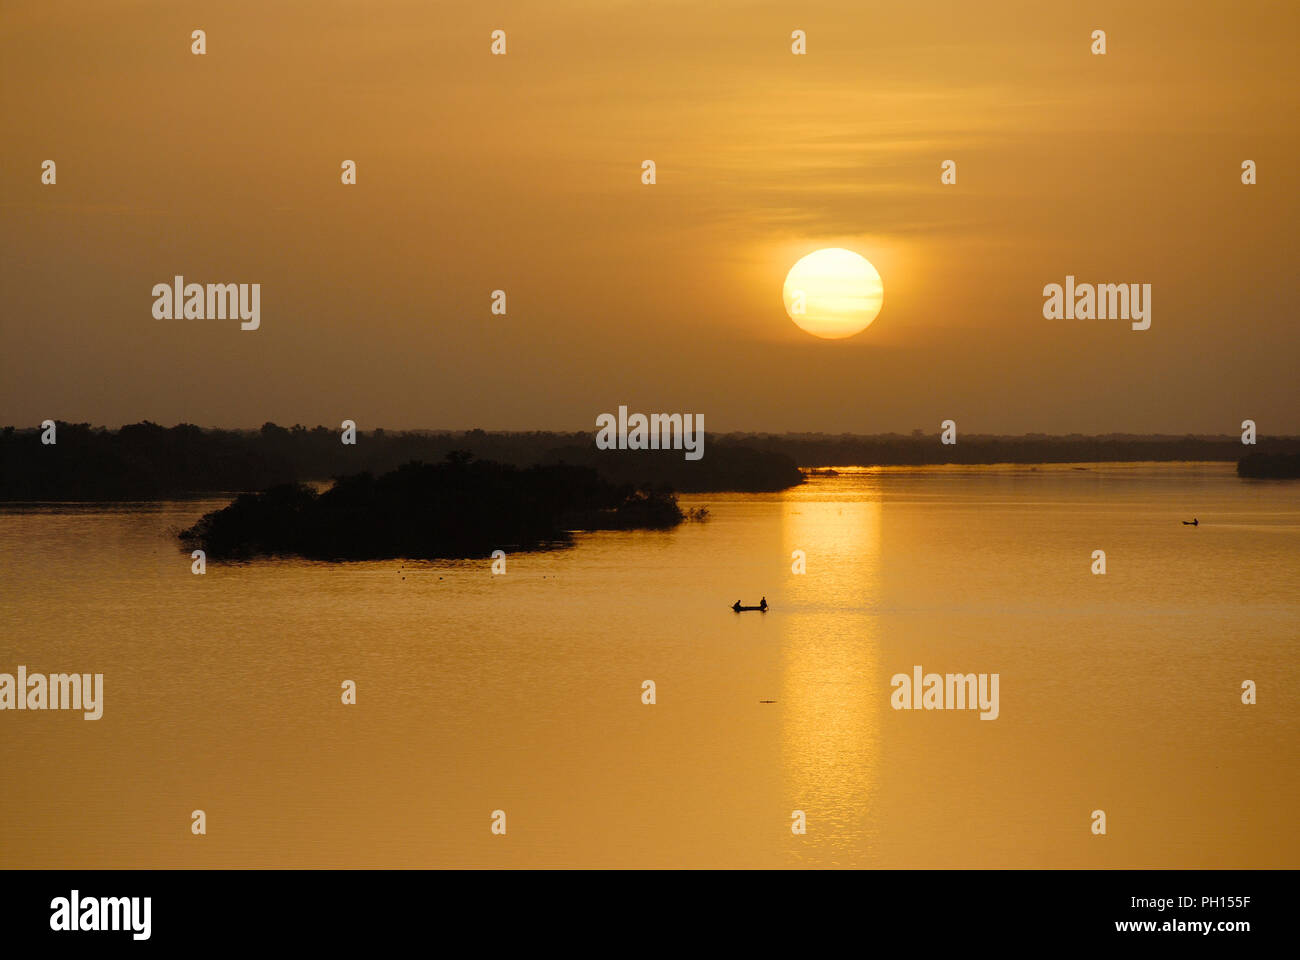 The Niger river at sunset. Mopti, Mali. West Africa Stock Photo